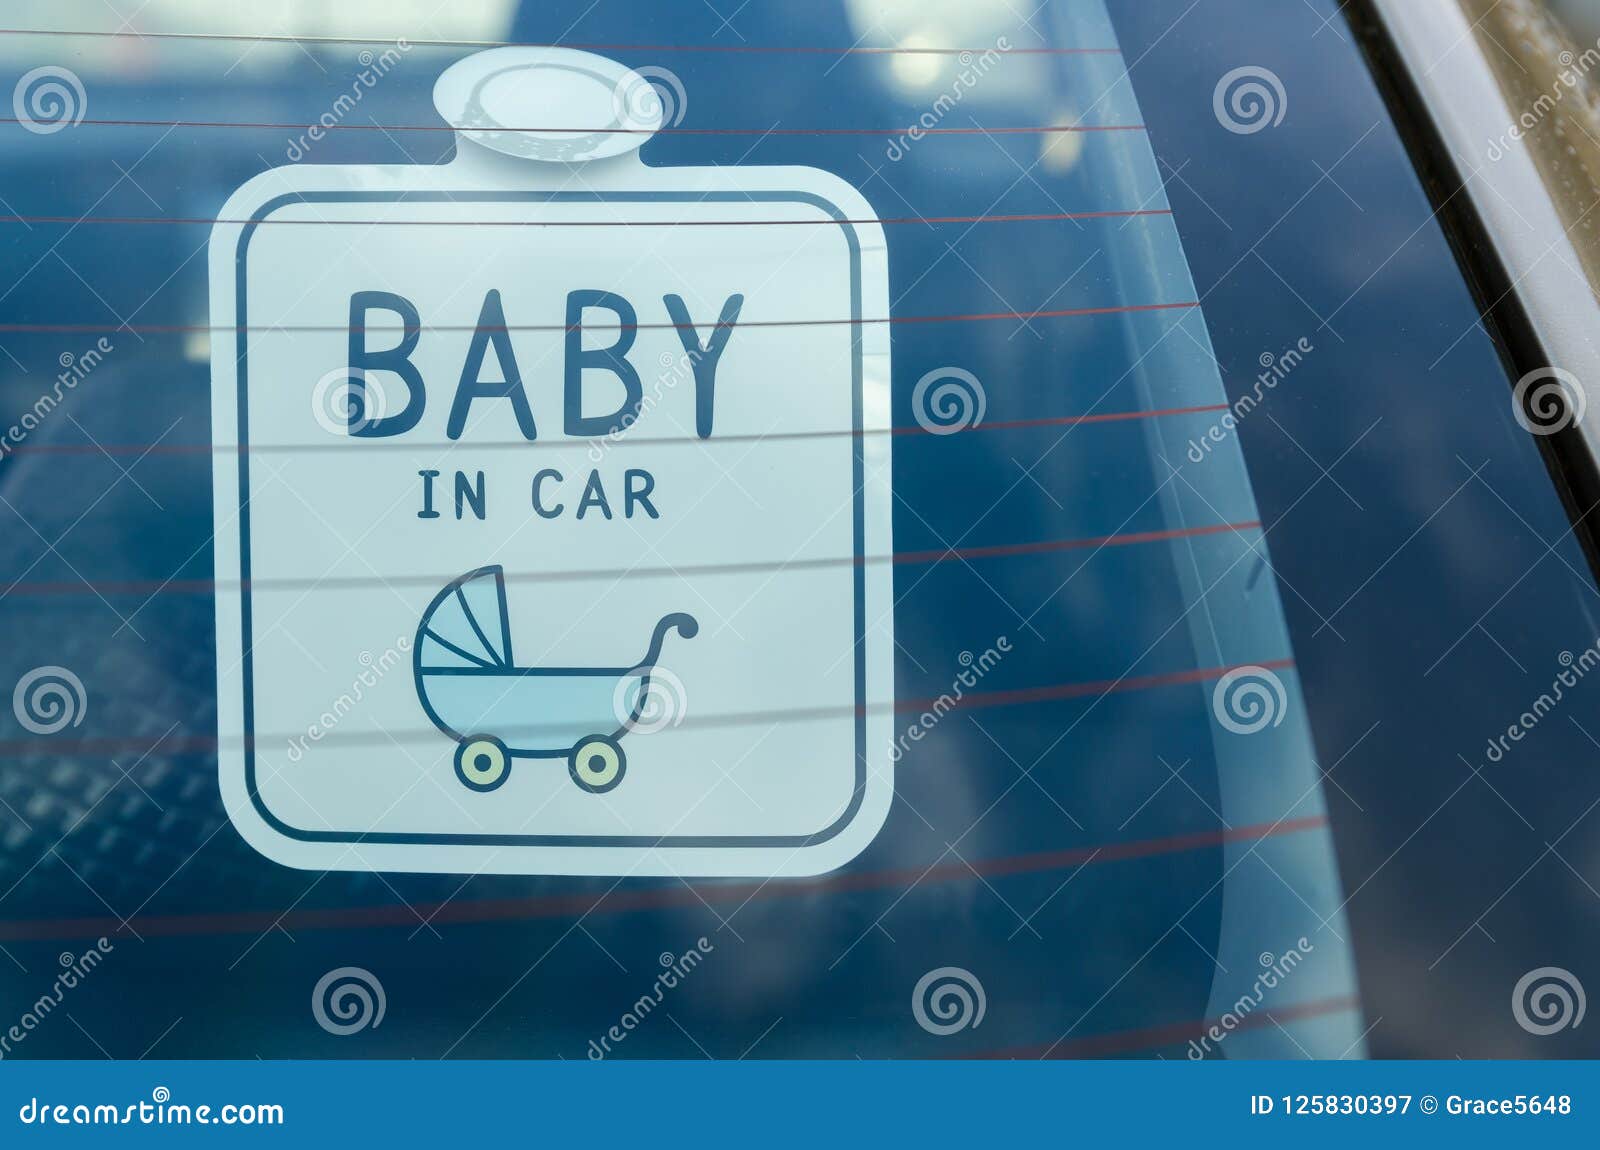 16,465 Baby On Board Sign Royalty-Free Images, Stock Photos